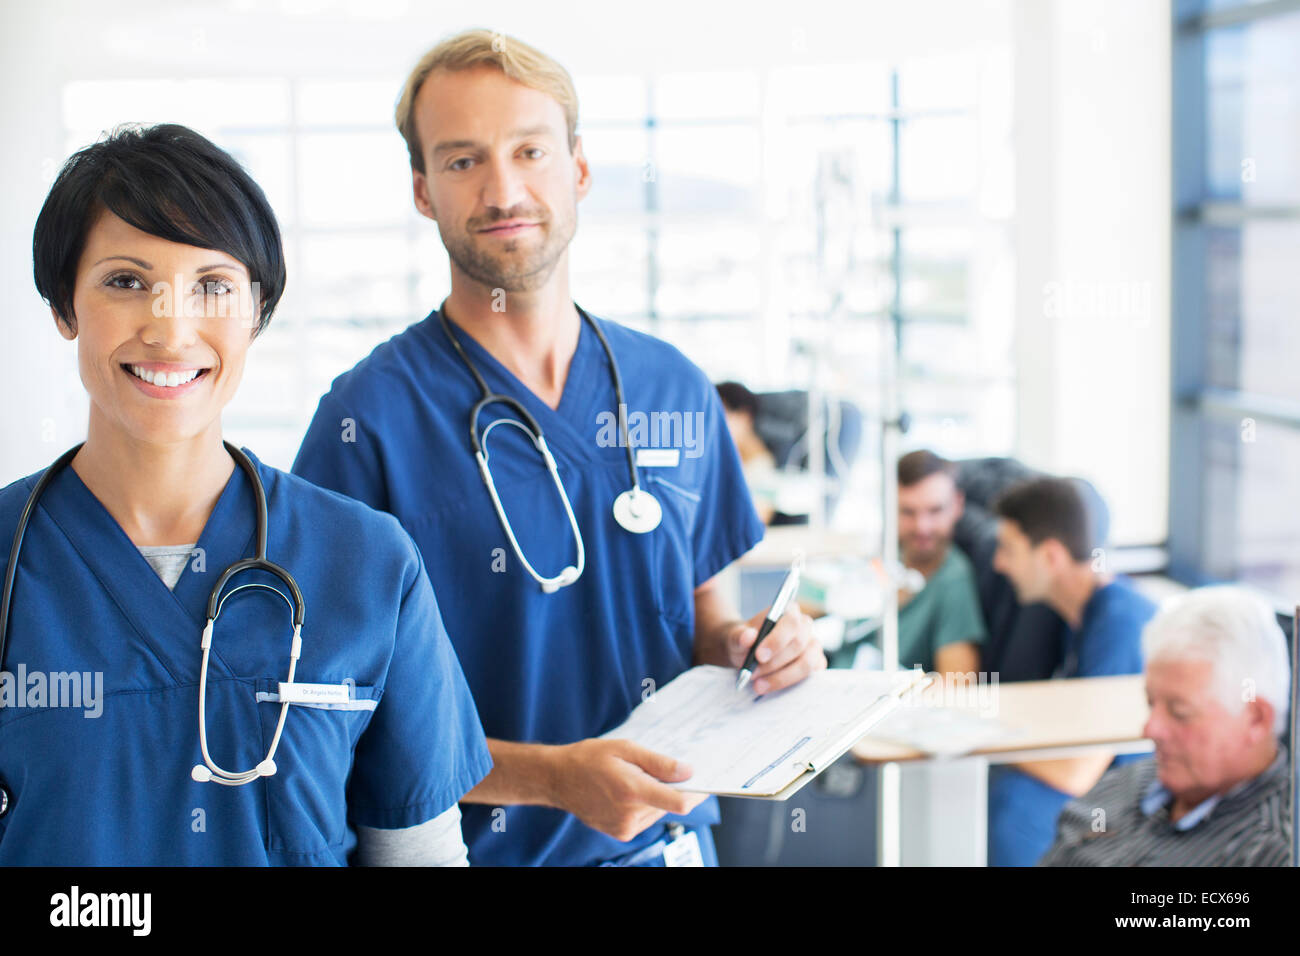 Portrait of doctors with patients receiving medical treatment in background Stock Photo